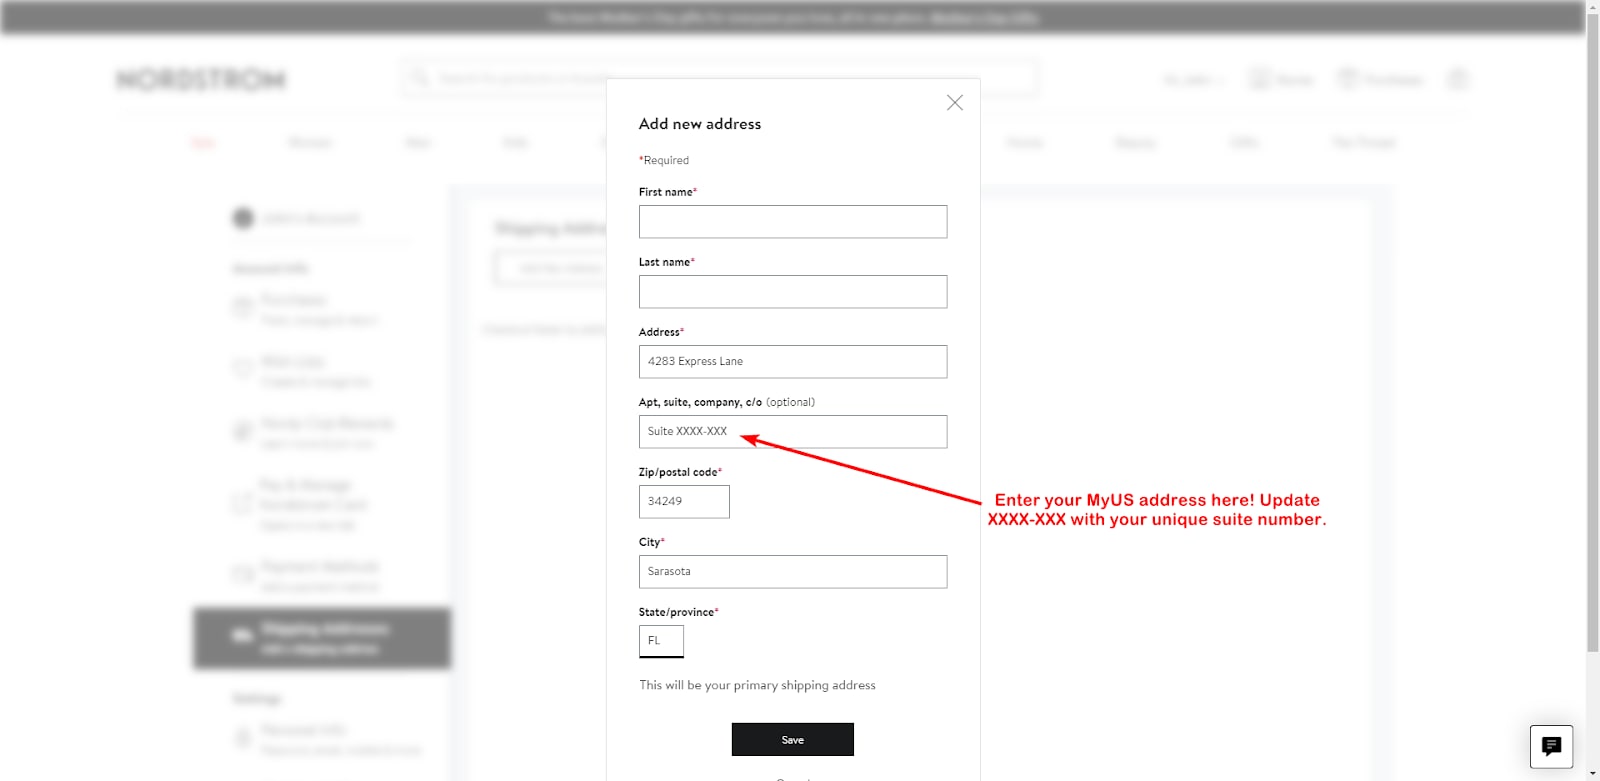 How to Save MyUS Address on Nordstrom Account